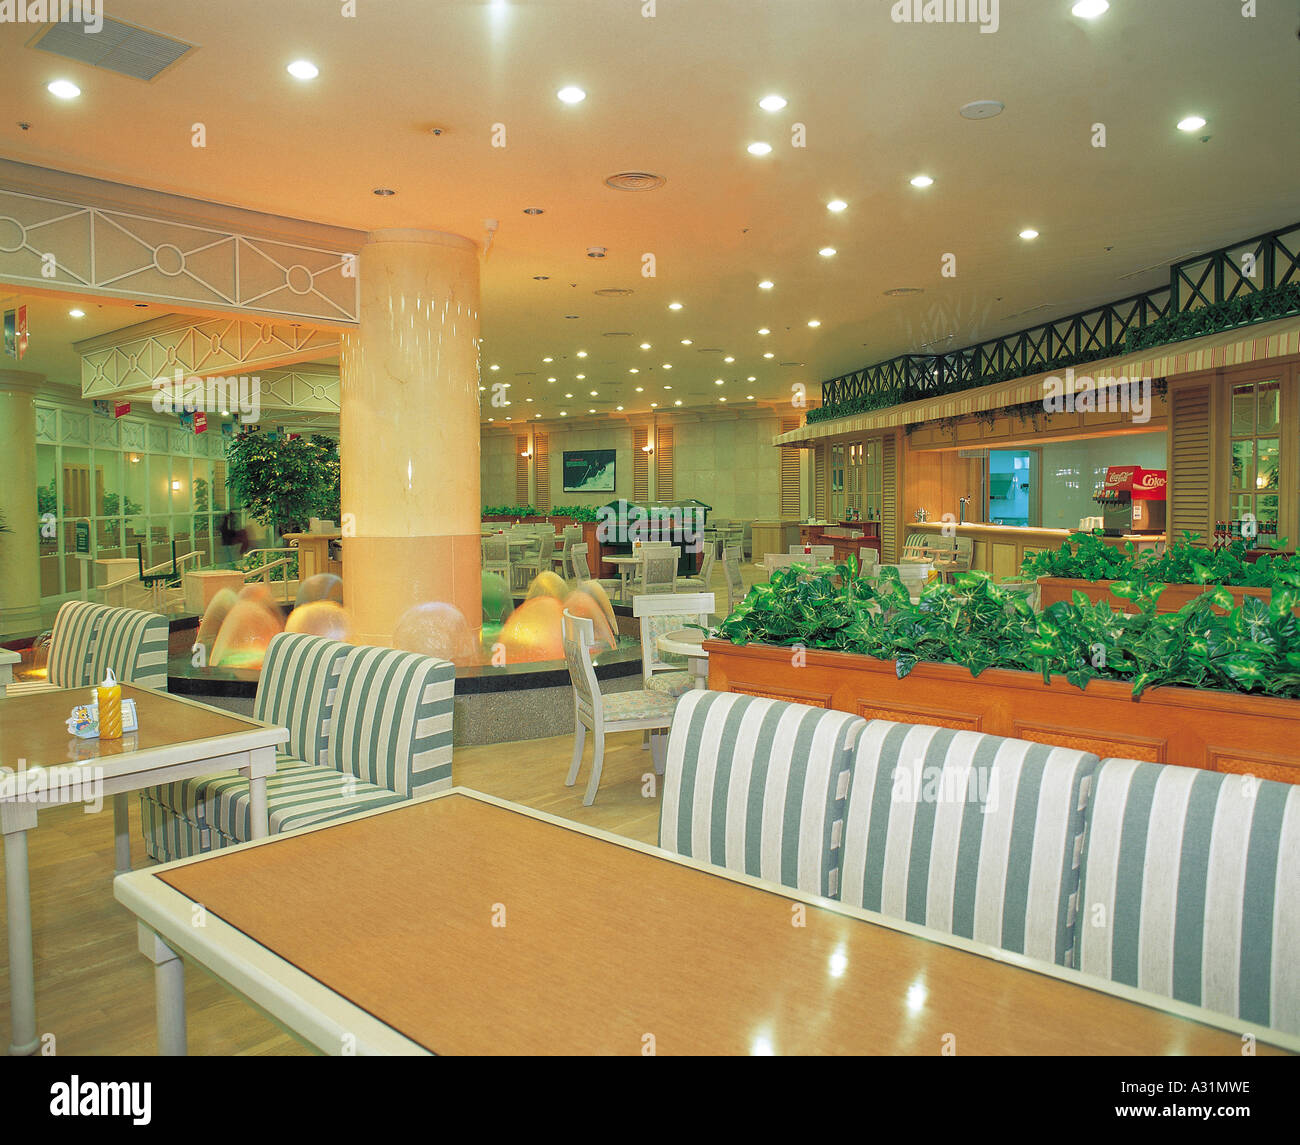 Restaurant Fountain Dining Room Catering Building Stock Photo Alamy